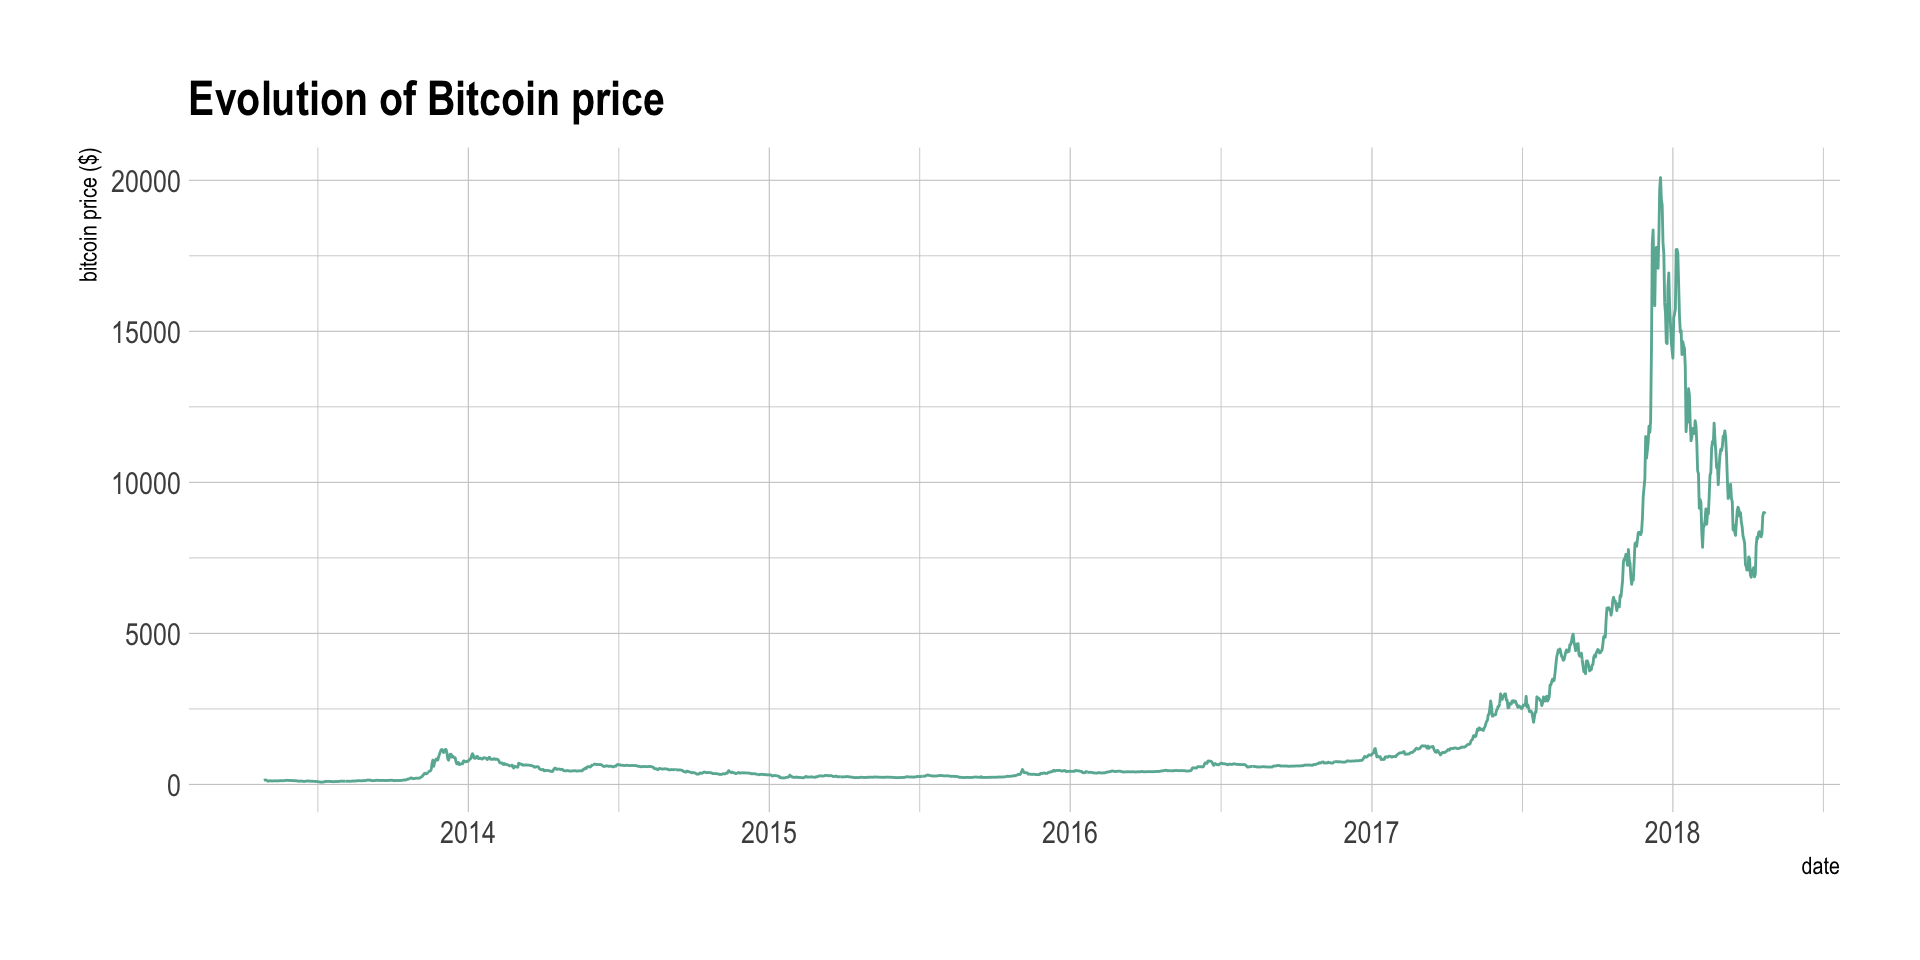 A simple line graph showing how bitcoin prices have evolved between 2014 and 2018